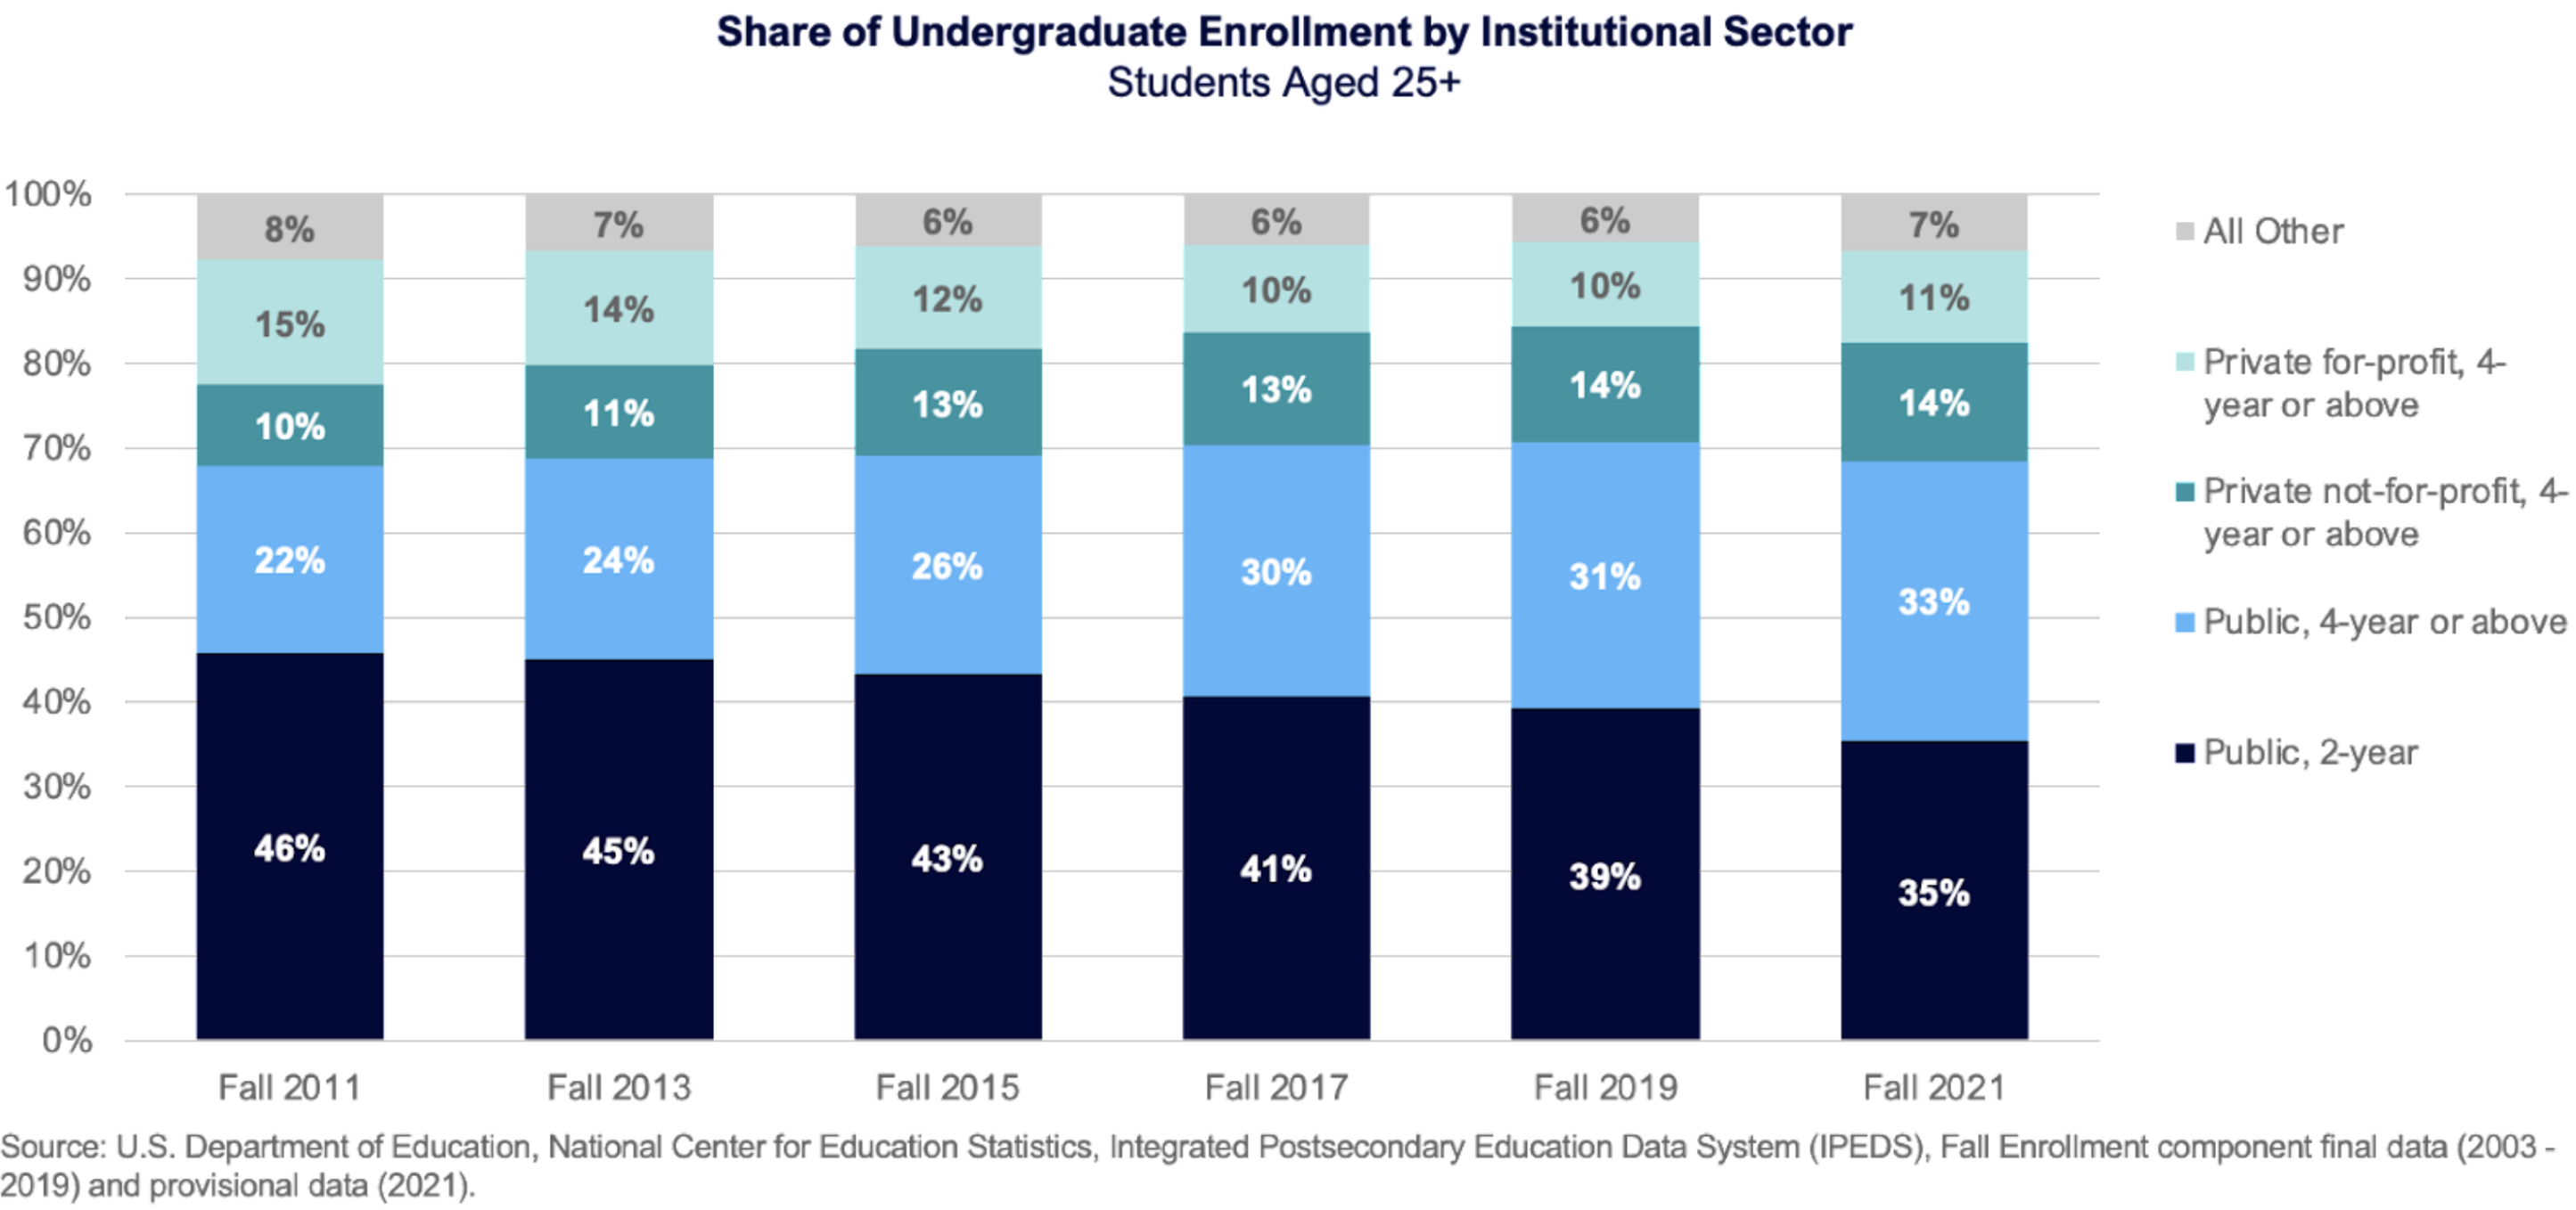 Share of Undergraduate Enrollment by Institutional Sector (students aged 25+)